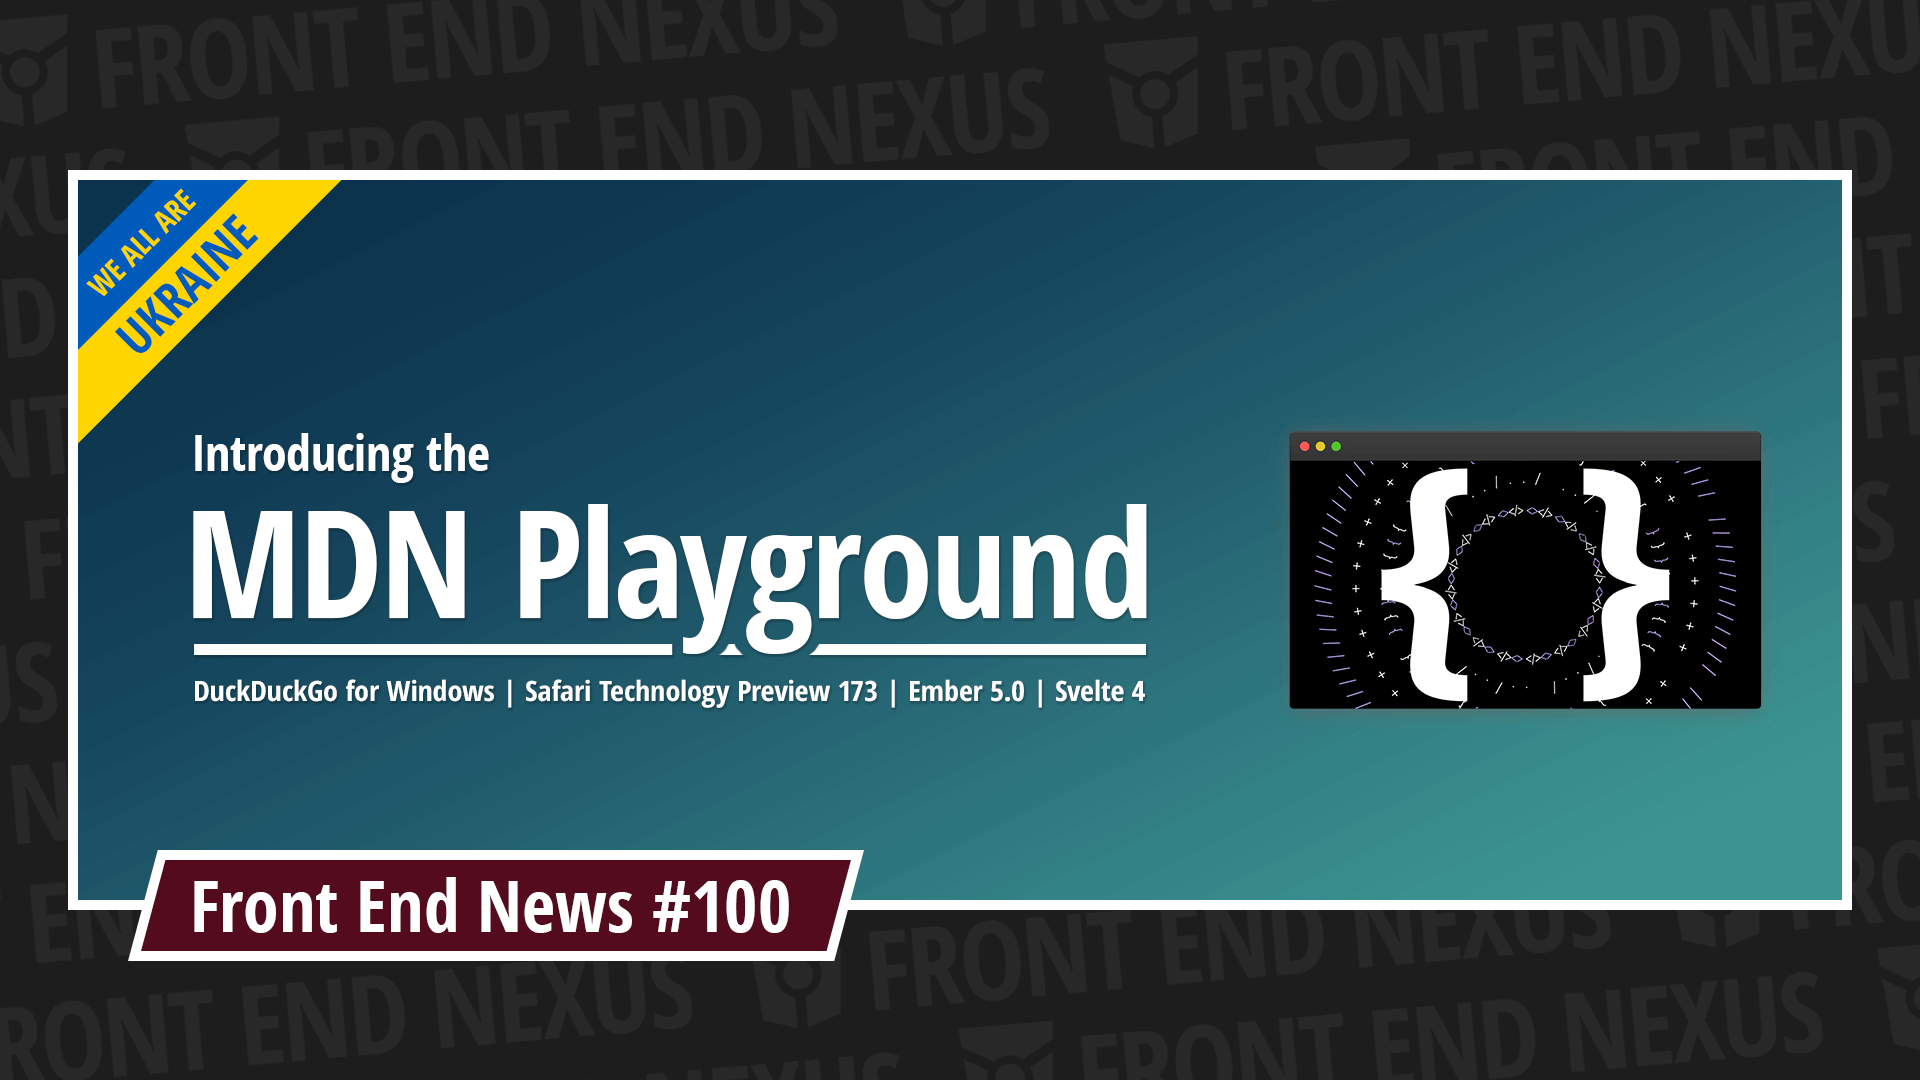 Introducing the MDN Playground, DuckDuckGo for Windows, Safari TP 173, Ember 5.0, Svelte 4, and more | Front End News #100